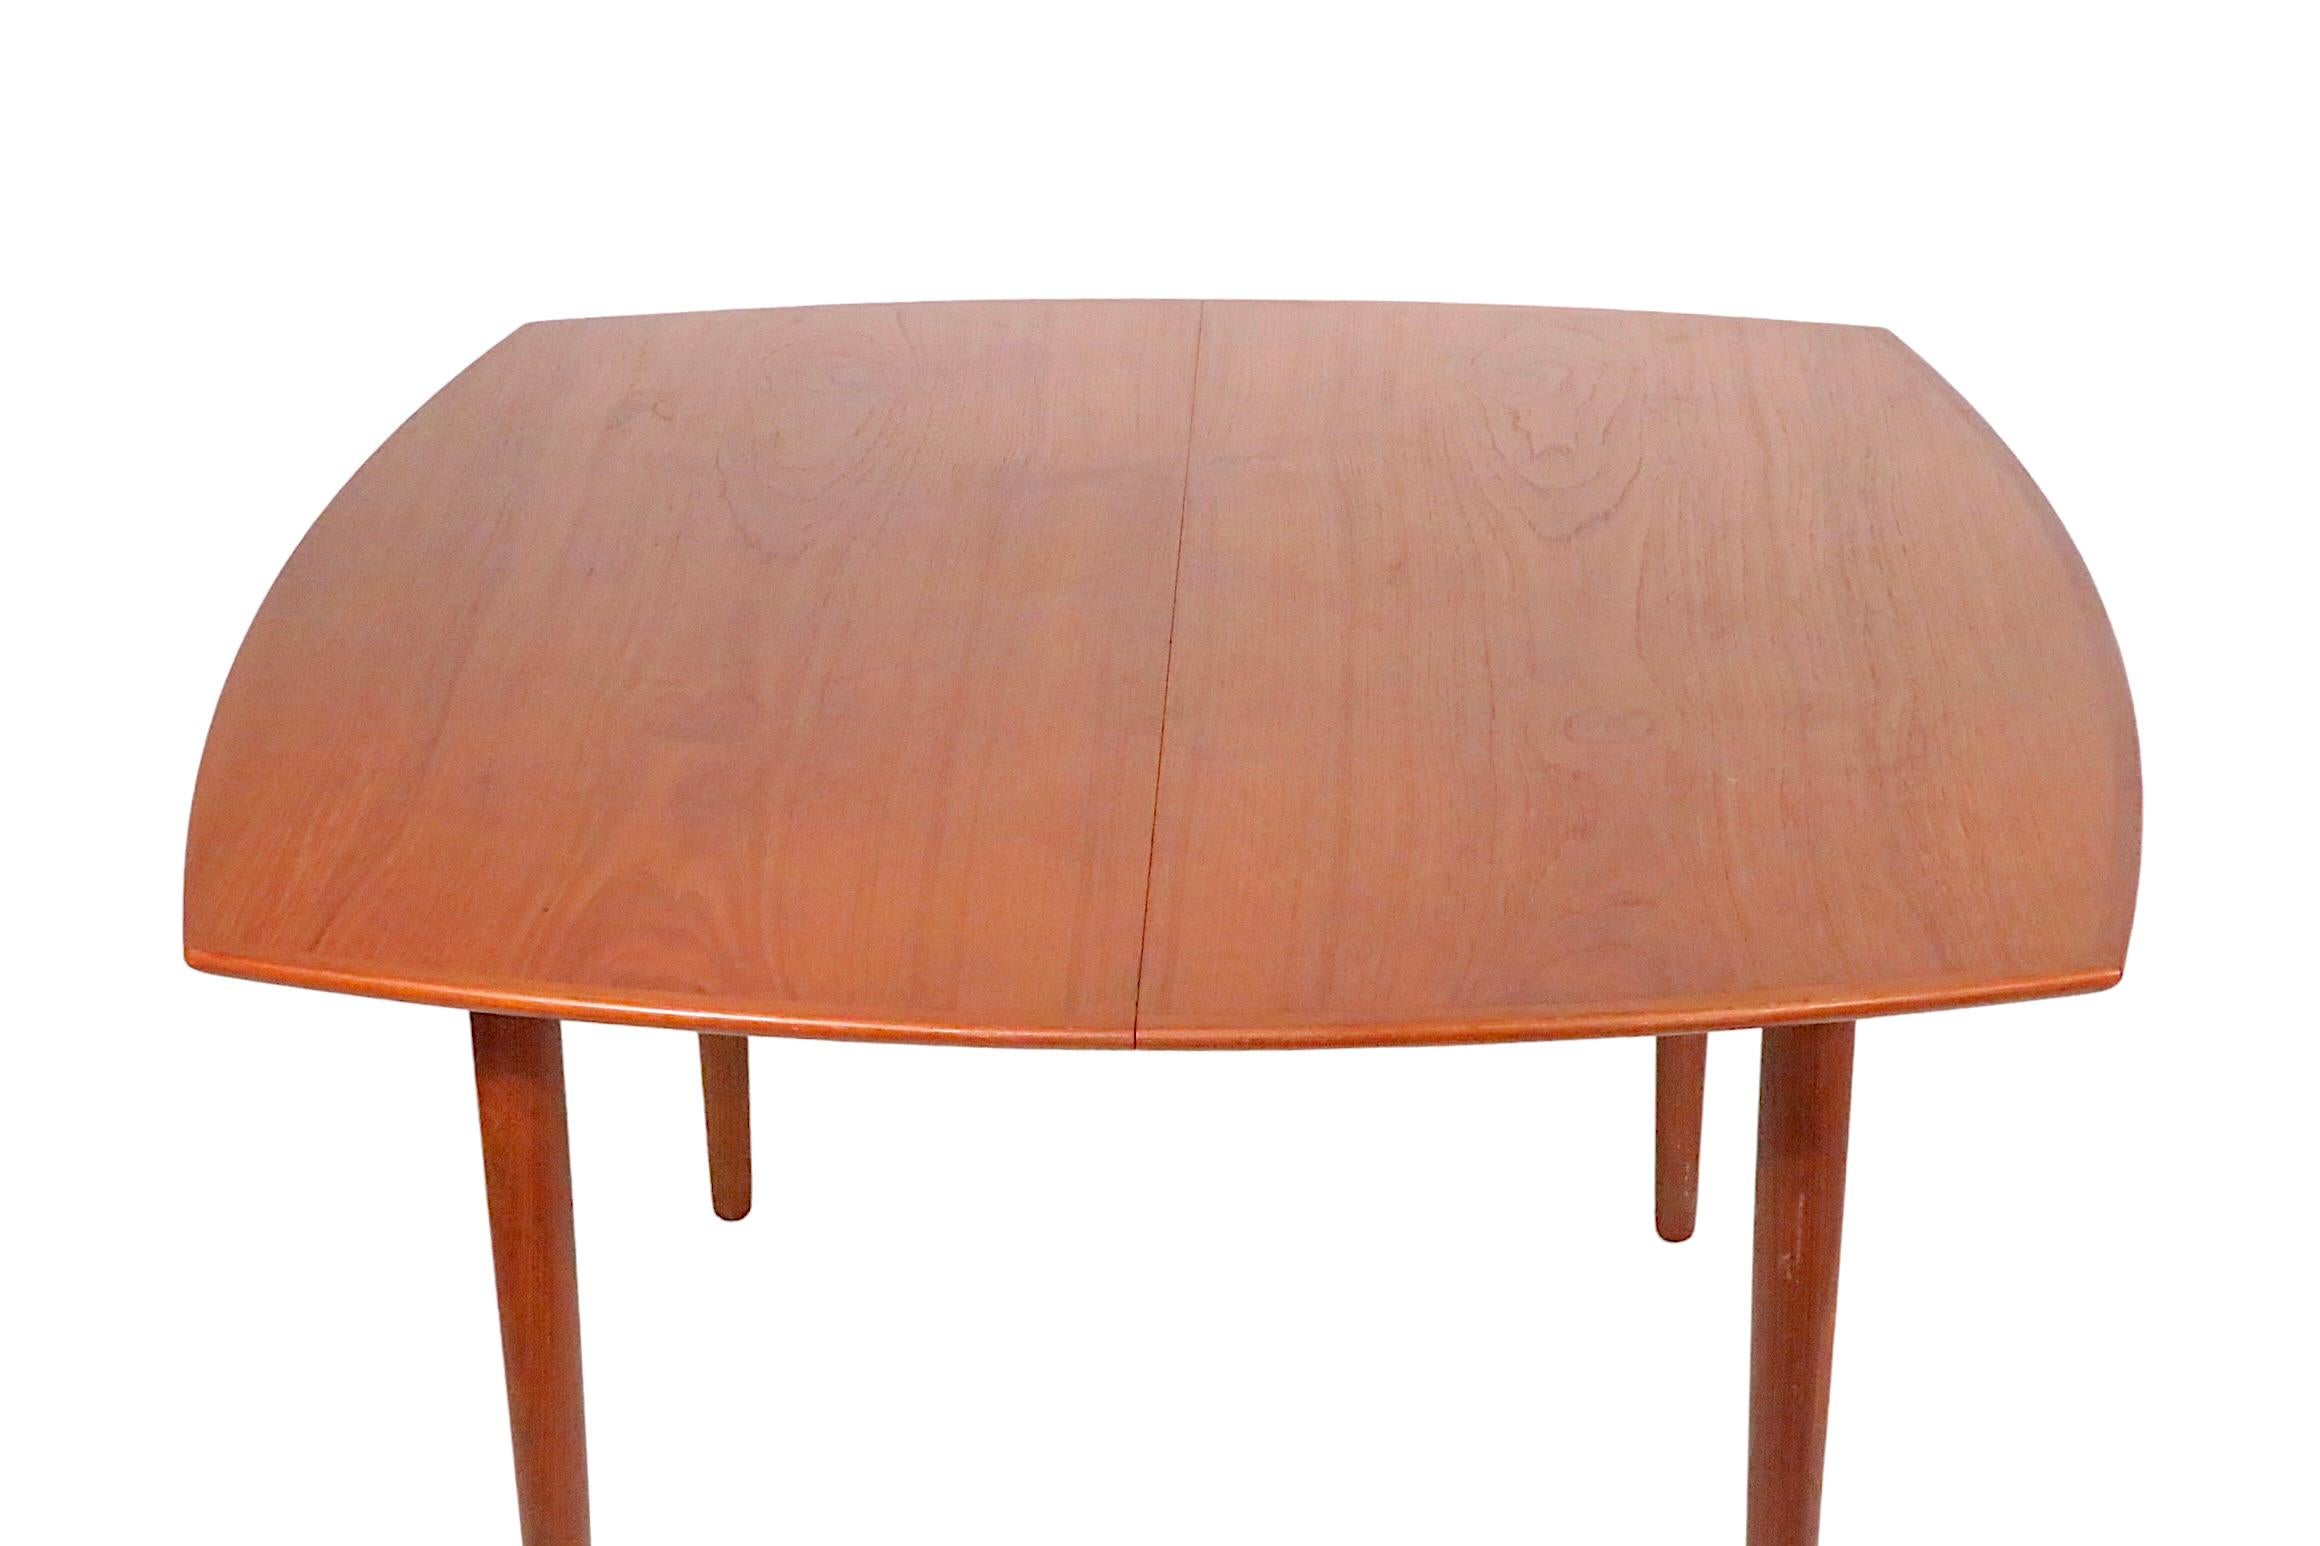 Danish Mid Century Modern Teak Extension  Dining Table by H W Klein  c 1950's For Sale 12